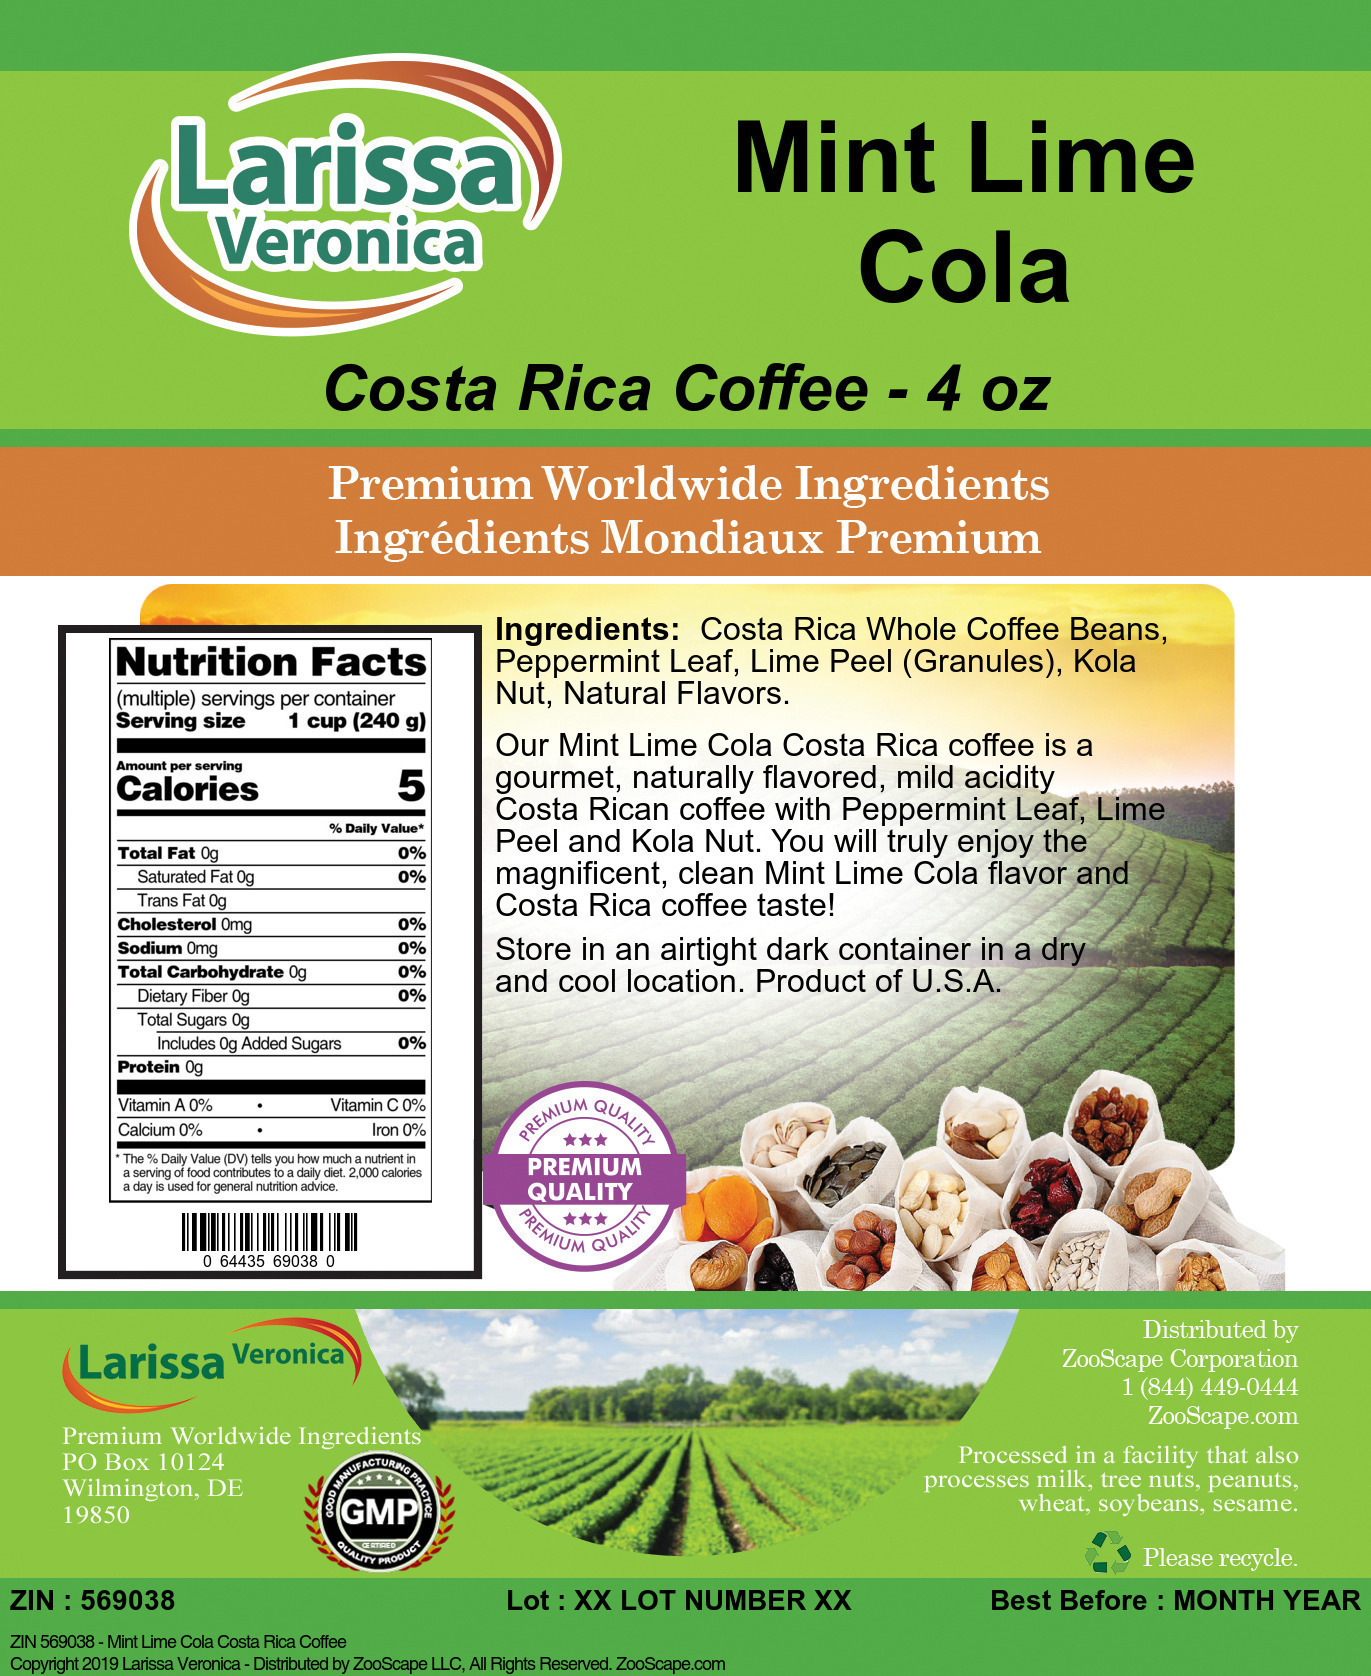 Mint Lime Cola Costa Rica Coffee - Label